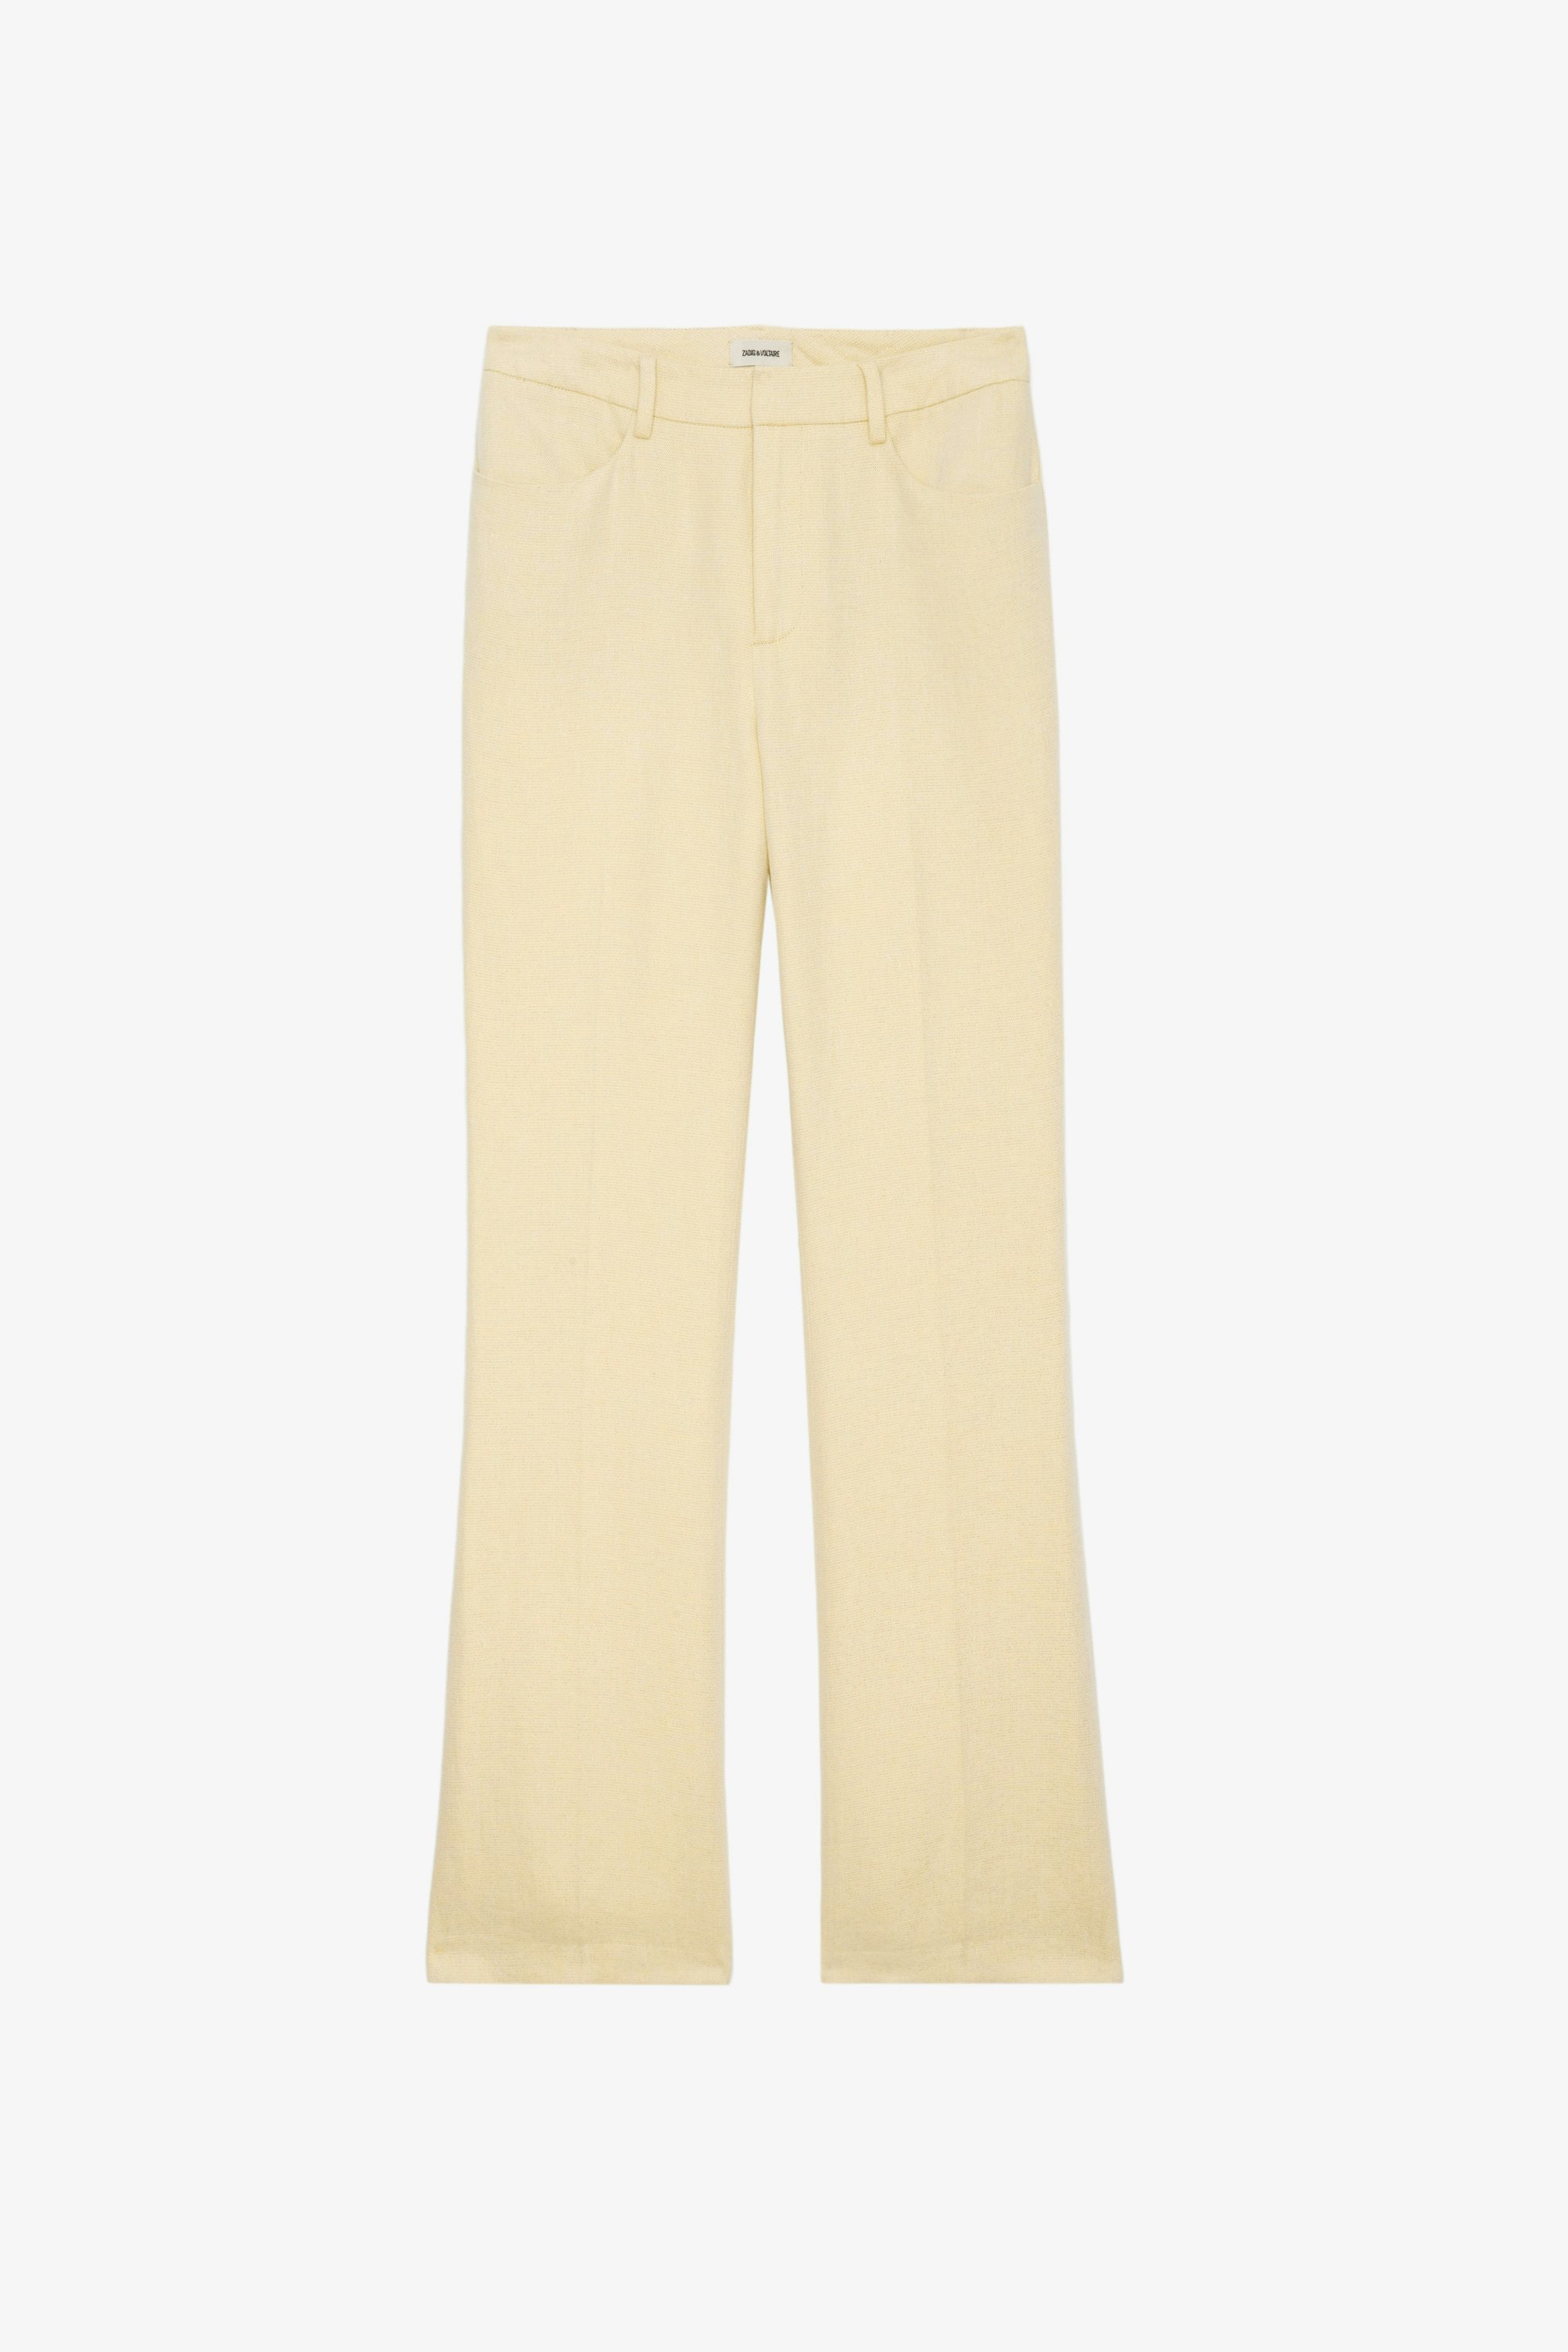 Pistol Trousers - Light yellow linen flared tailored trousers with pockets and pleats.